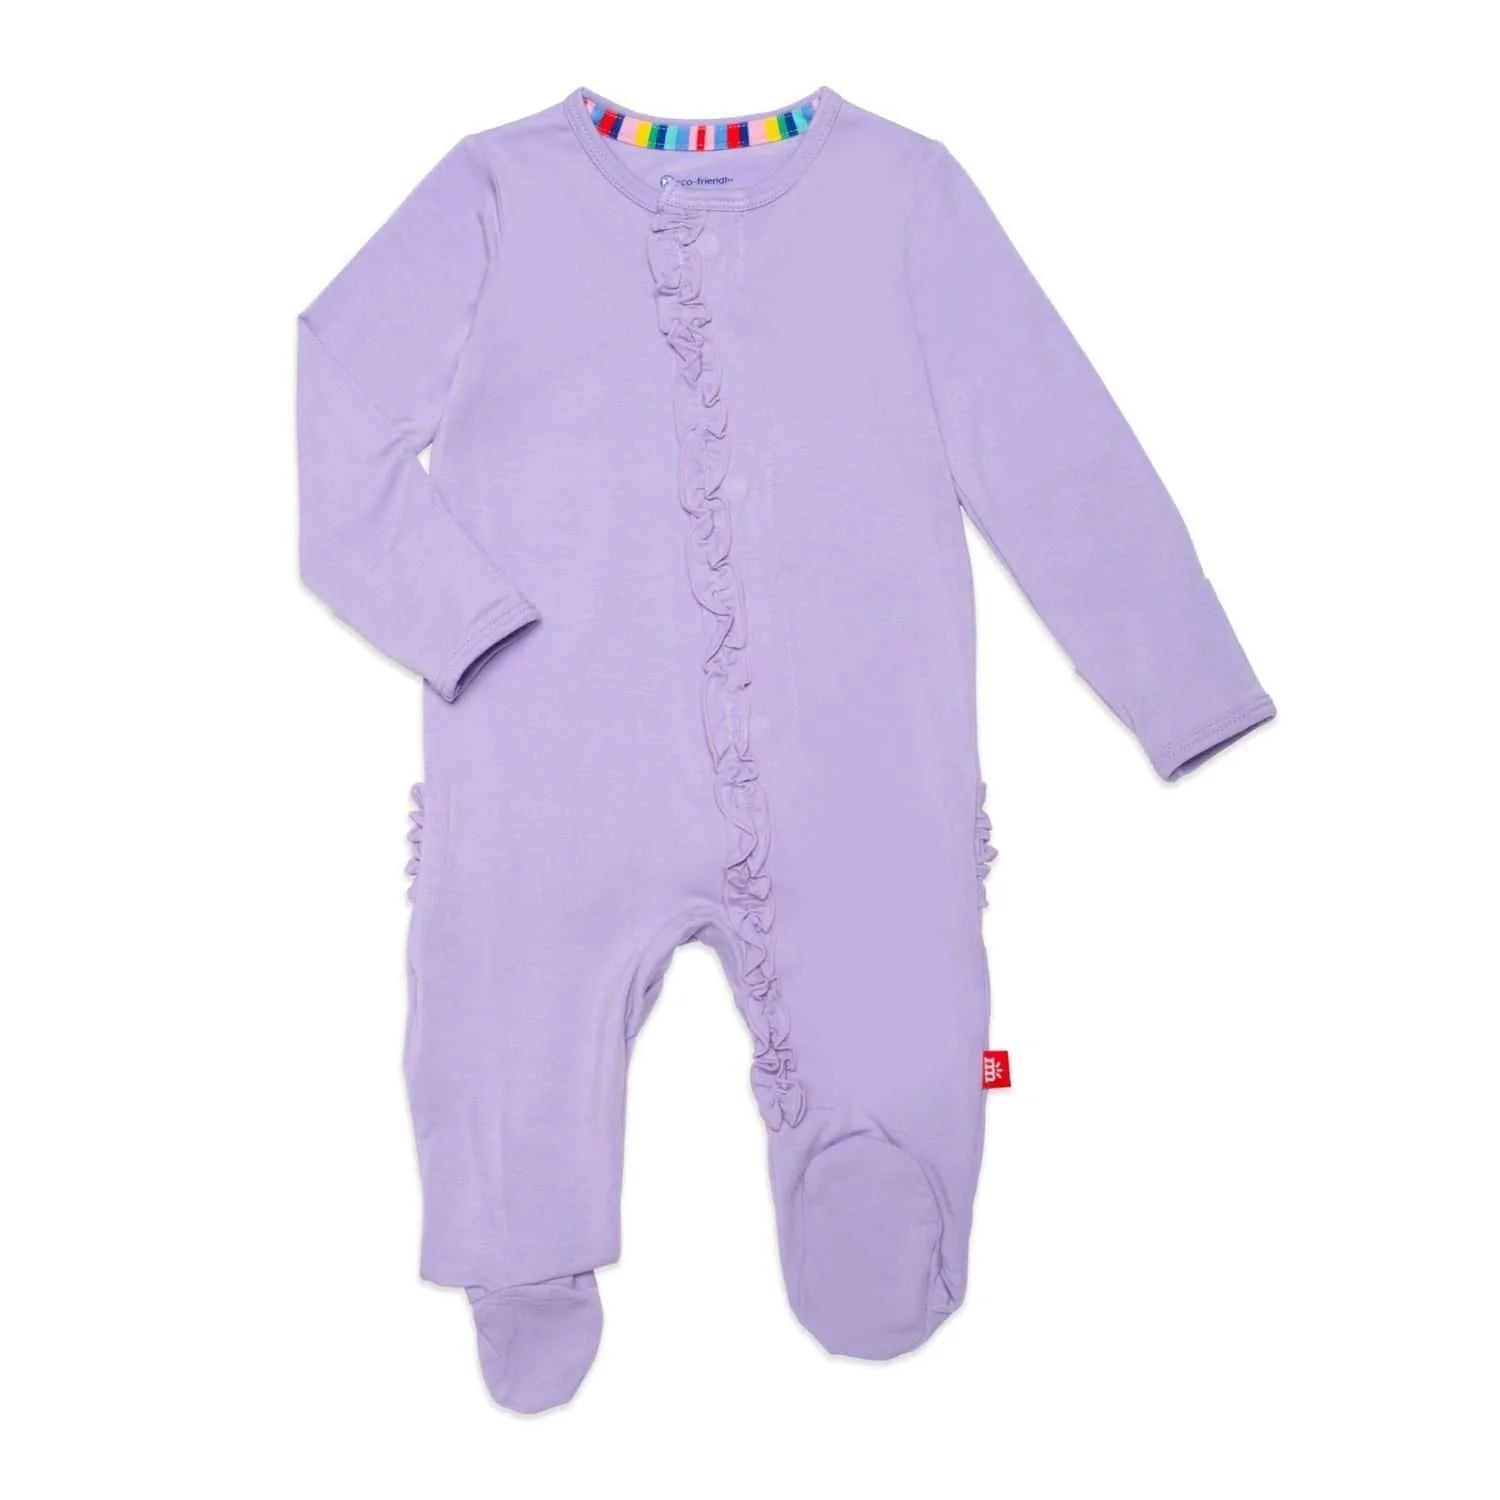 Magnetic purple footie for baby girl